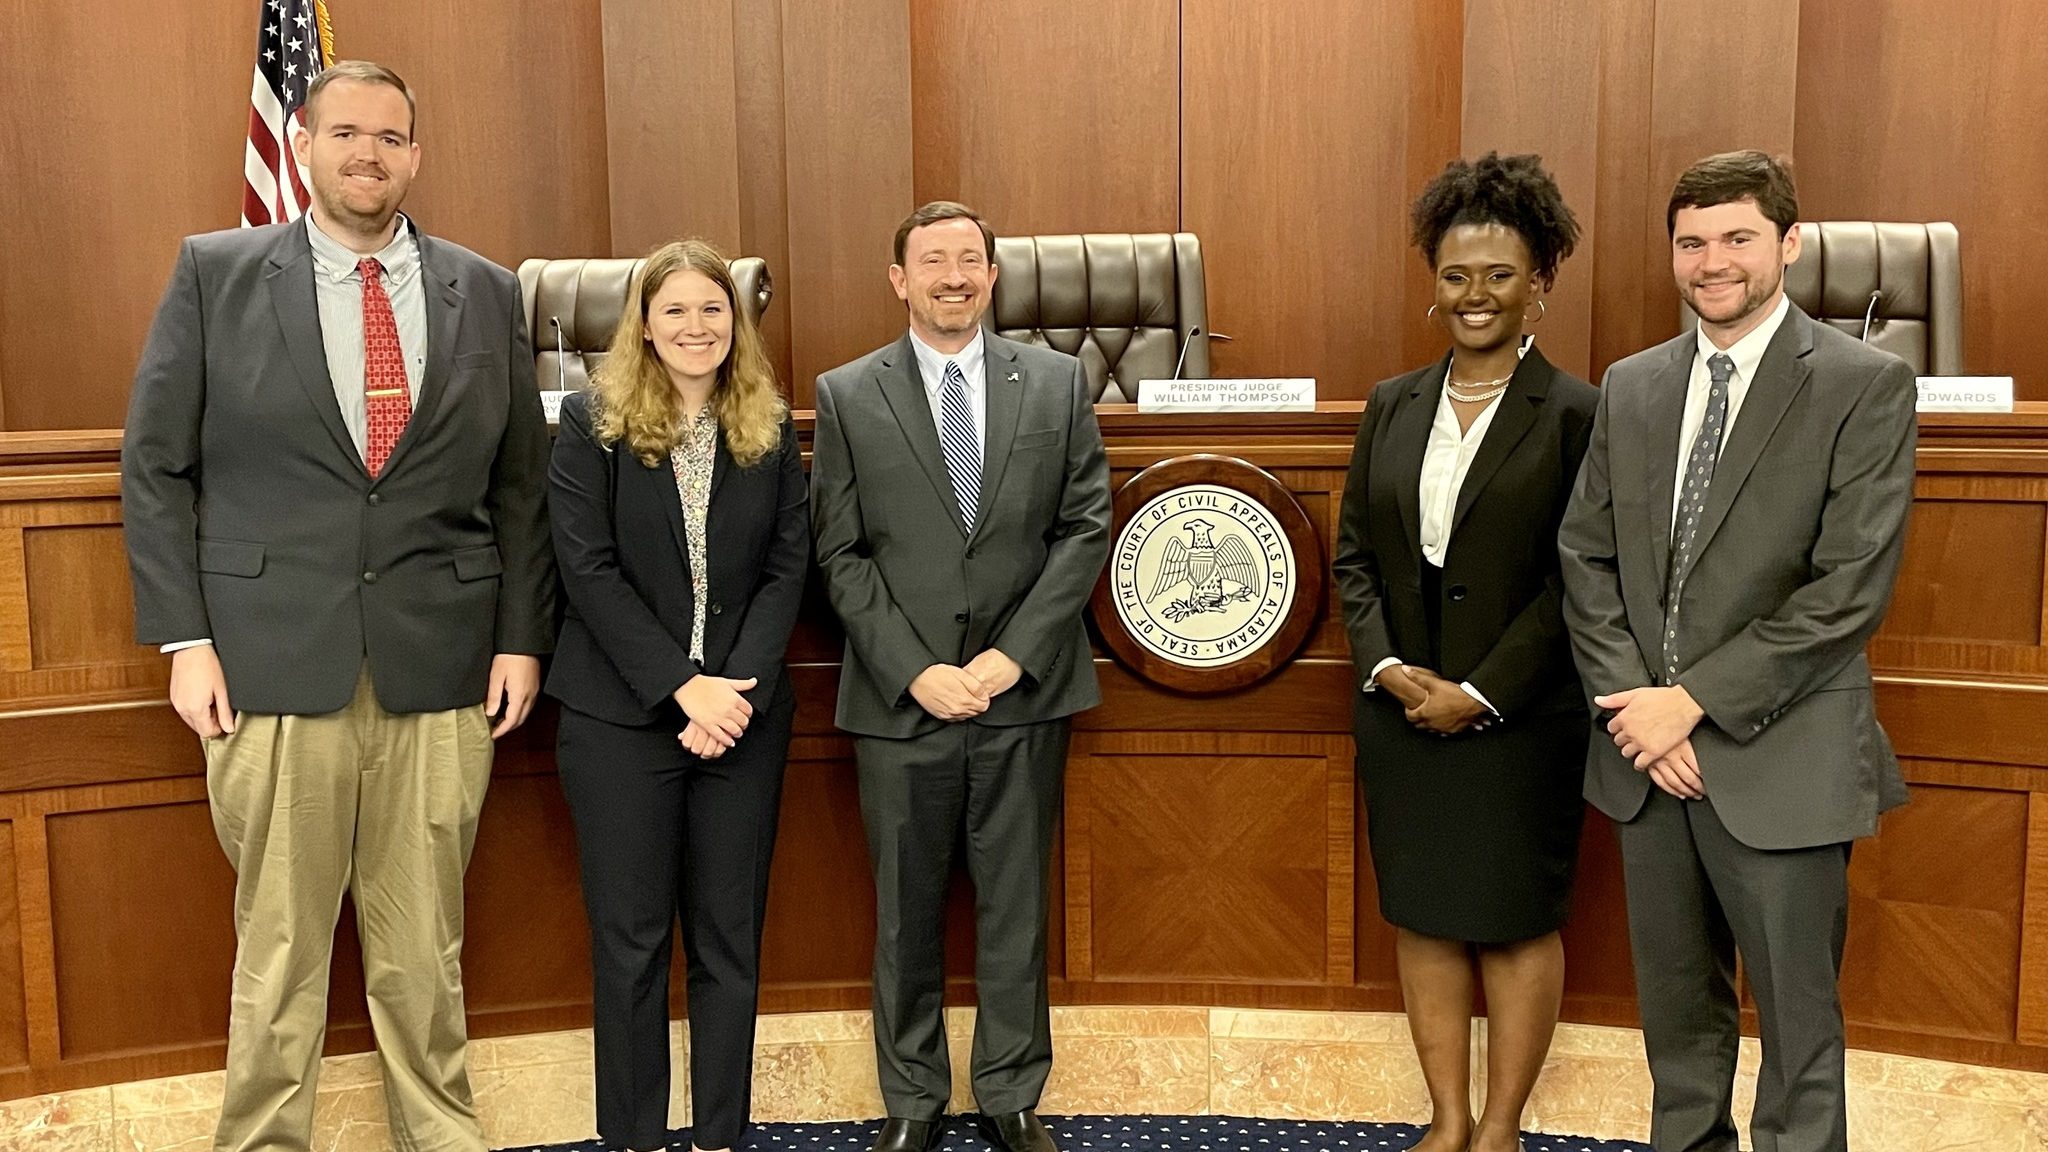 3L Students Win Oral Arguments Before Alabama Court of Civil Appeals